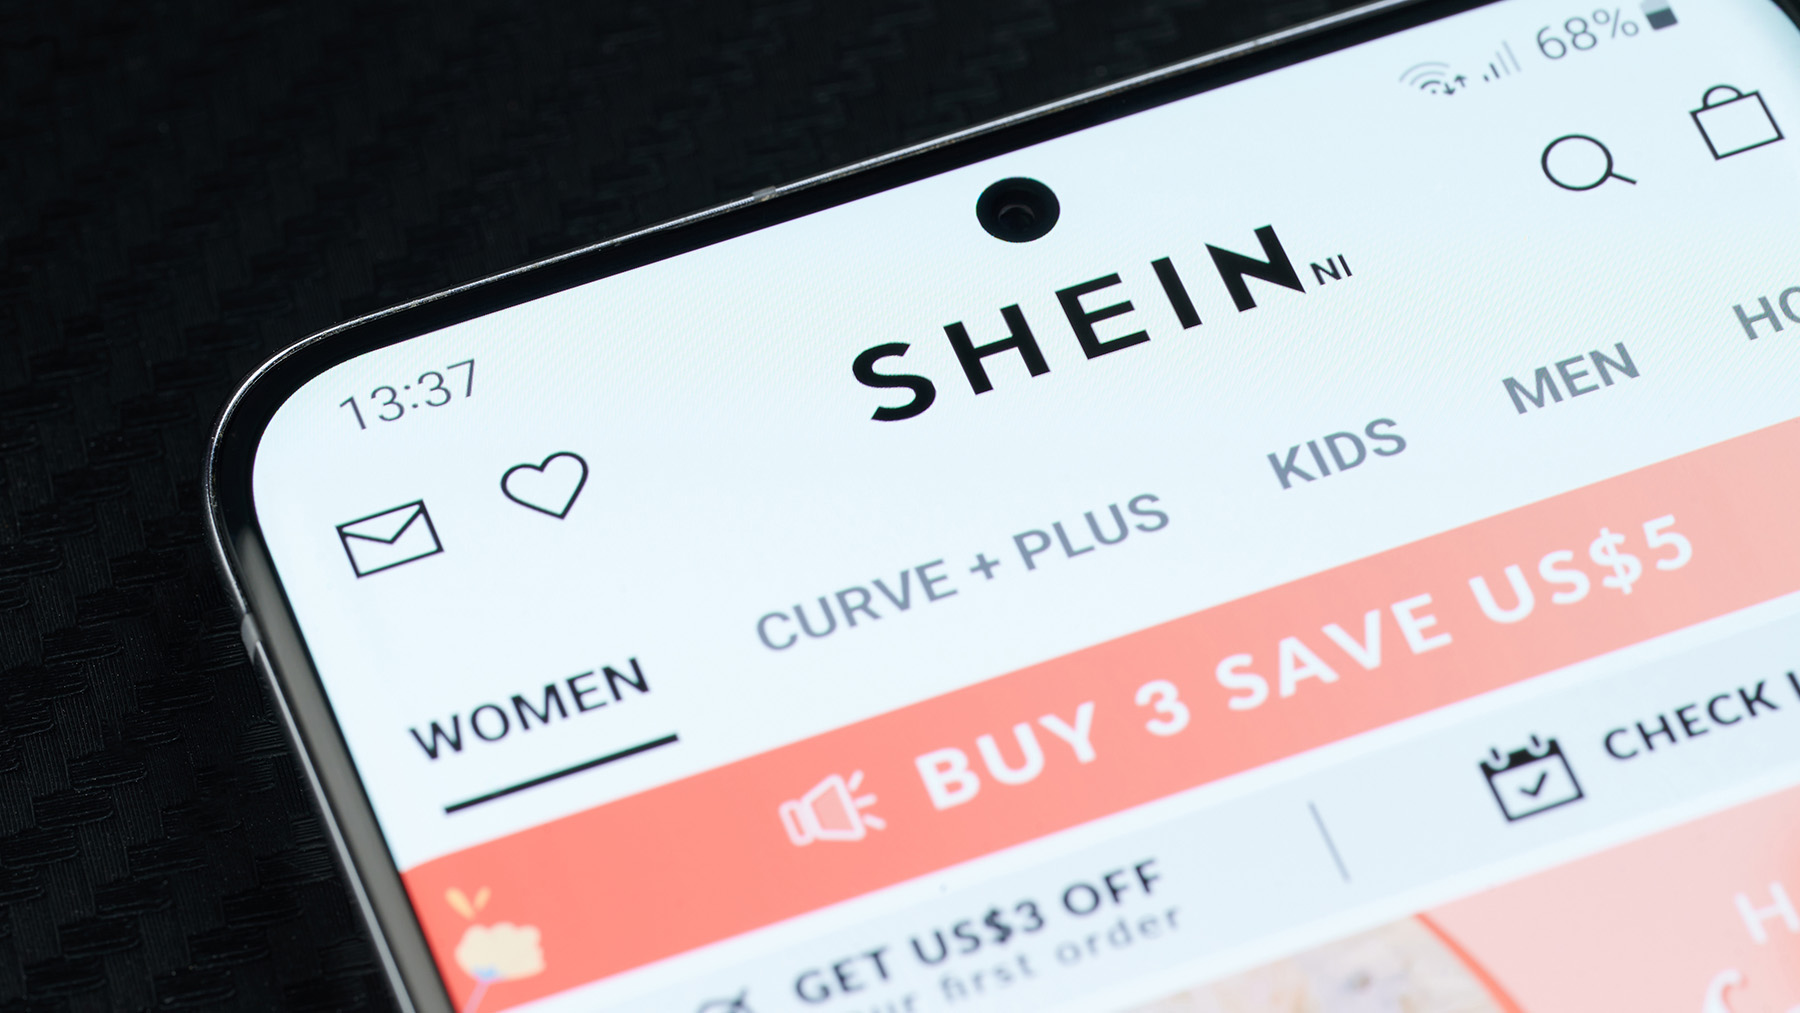 Shein to sell co-branded Forever 21 clothes online